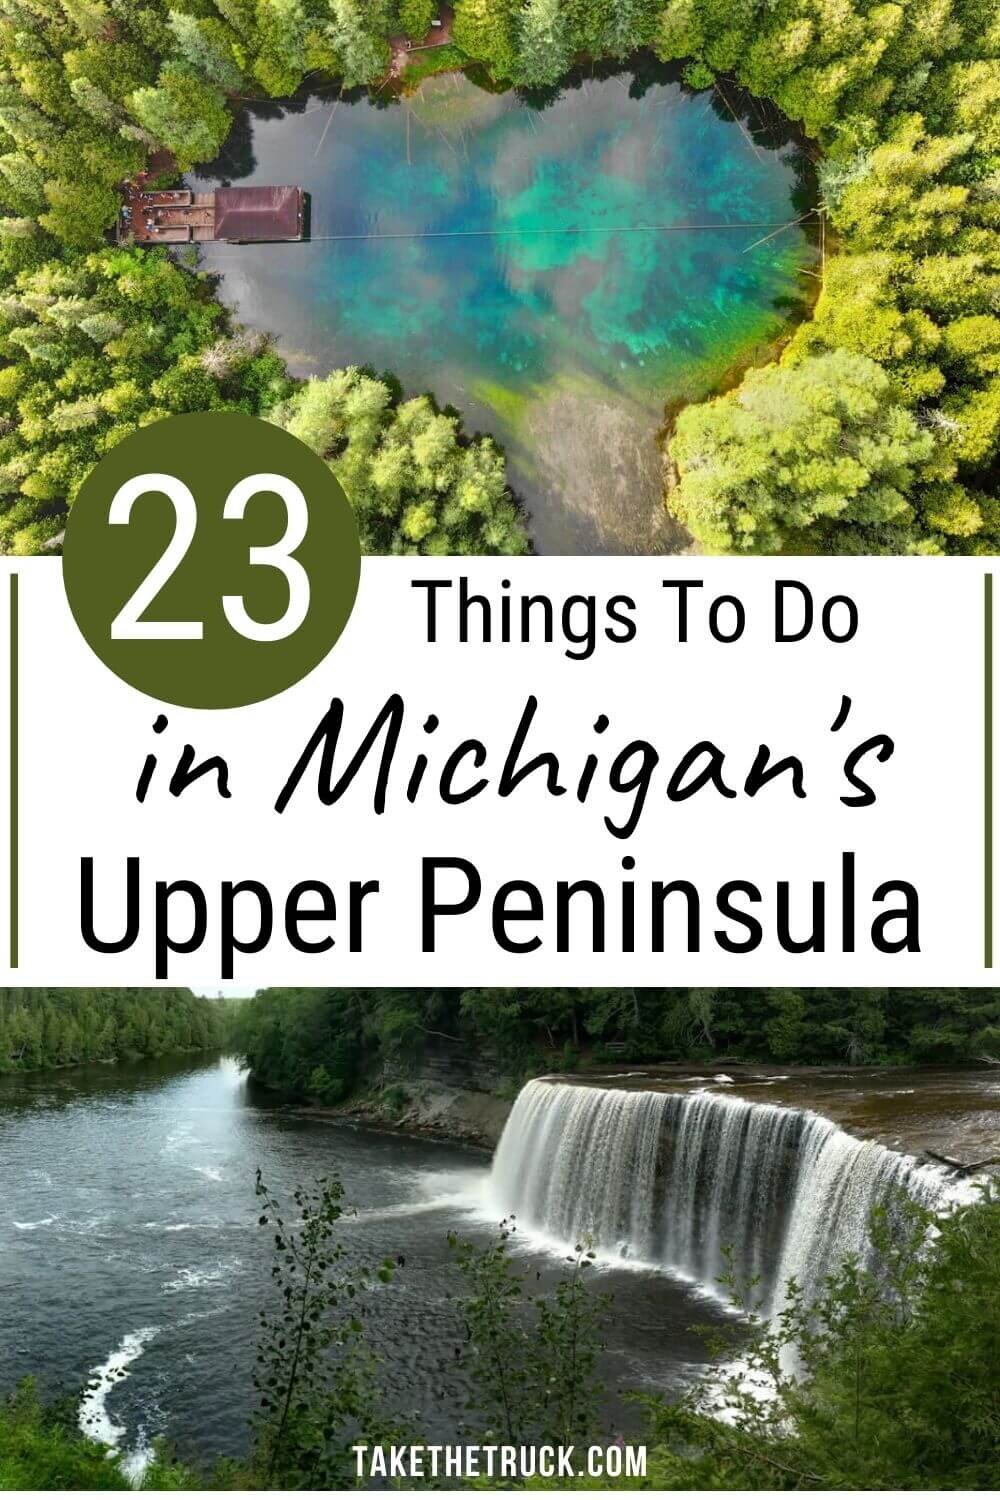 Plan your Upper Peninsula road trip or vacation with these 23 things to do in the U.P. of MIchigan- forests, hiking, parks, lighthouses, great lakes, attractions, off-roading -something for everyone!